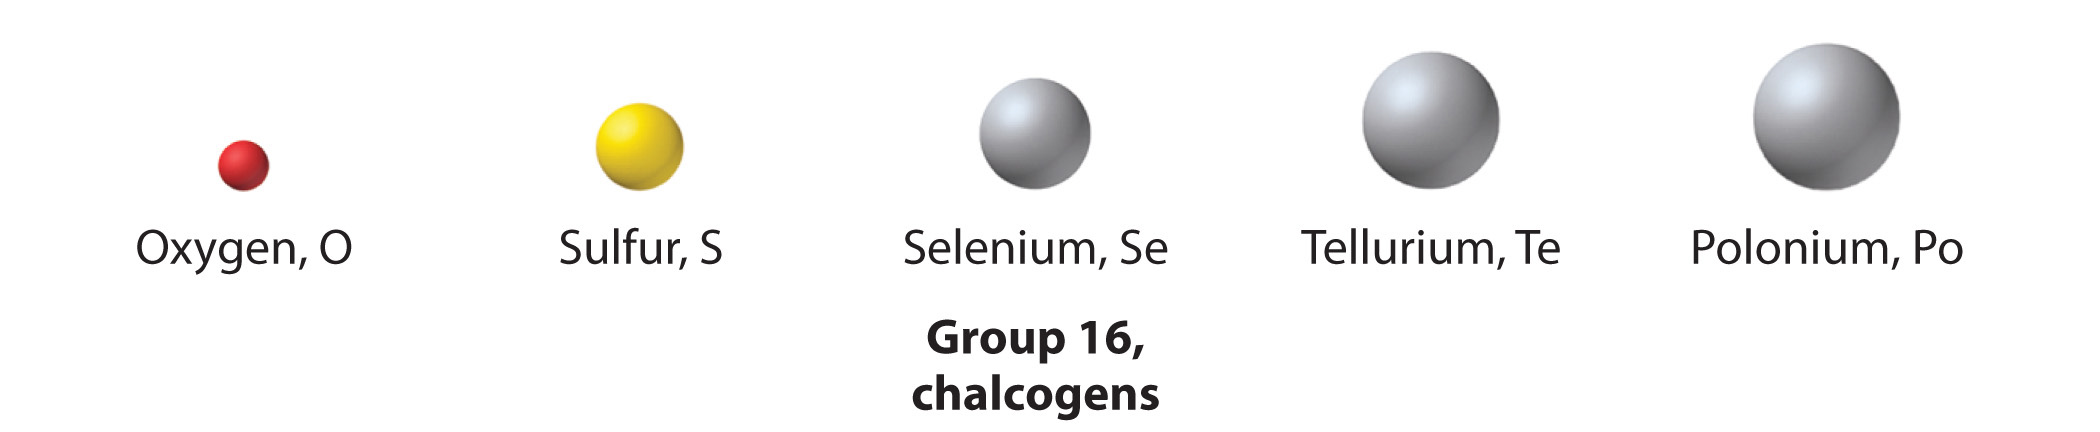 The elements of group 16, the chalcogens, are shown.